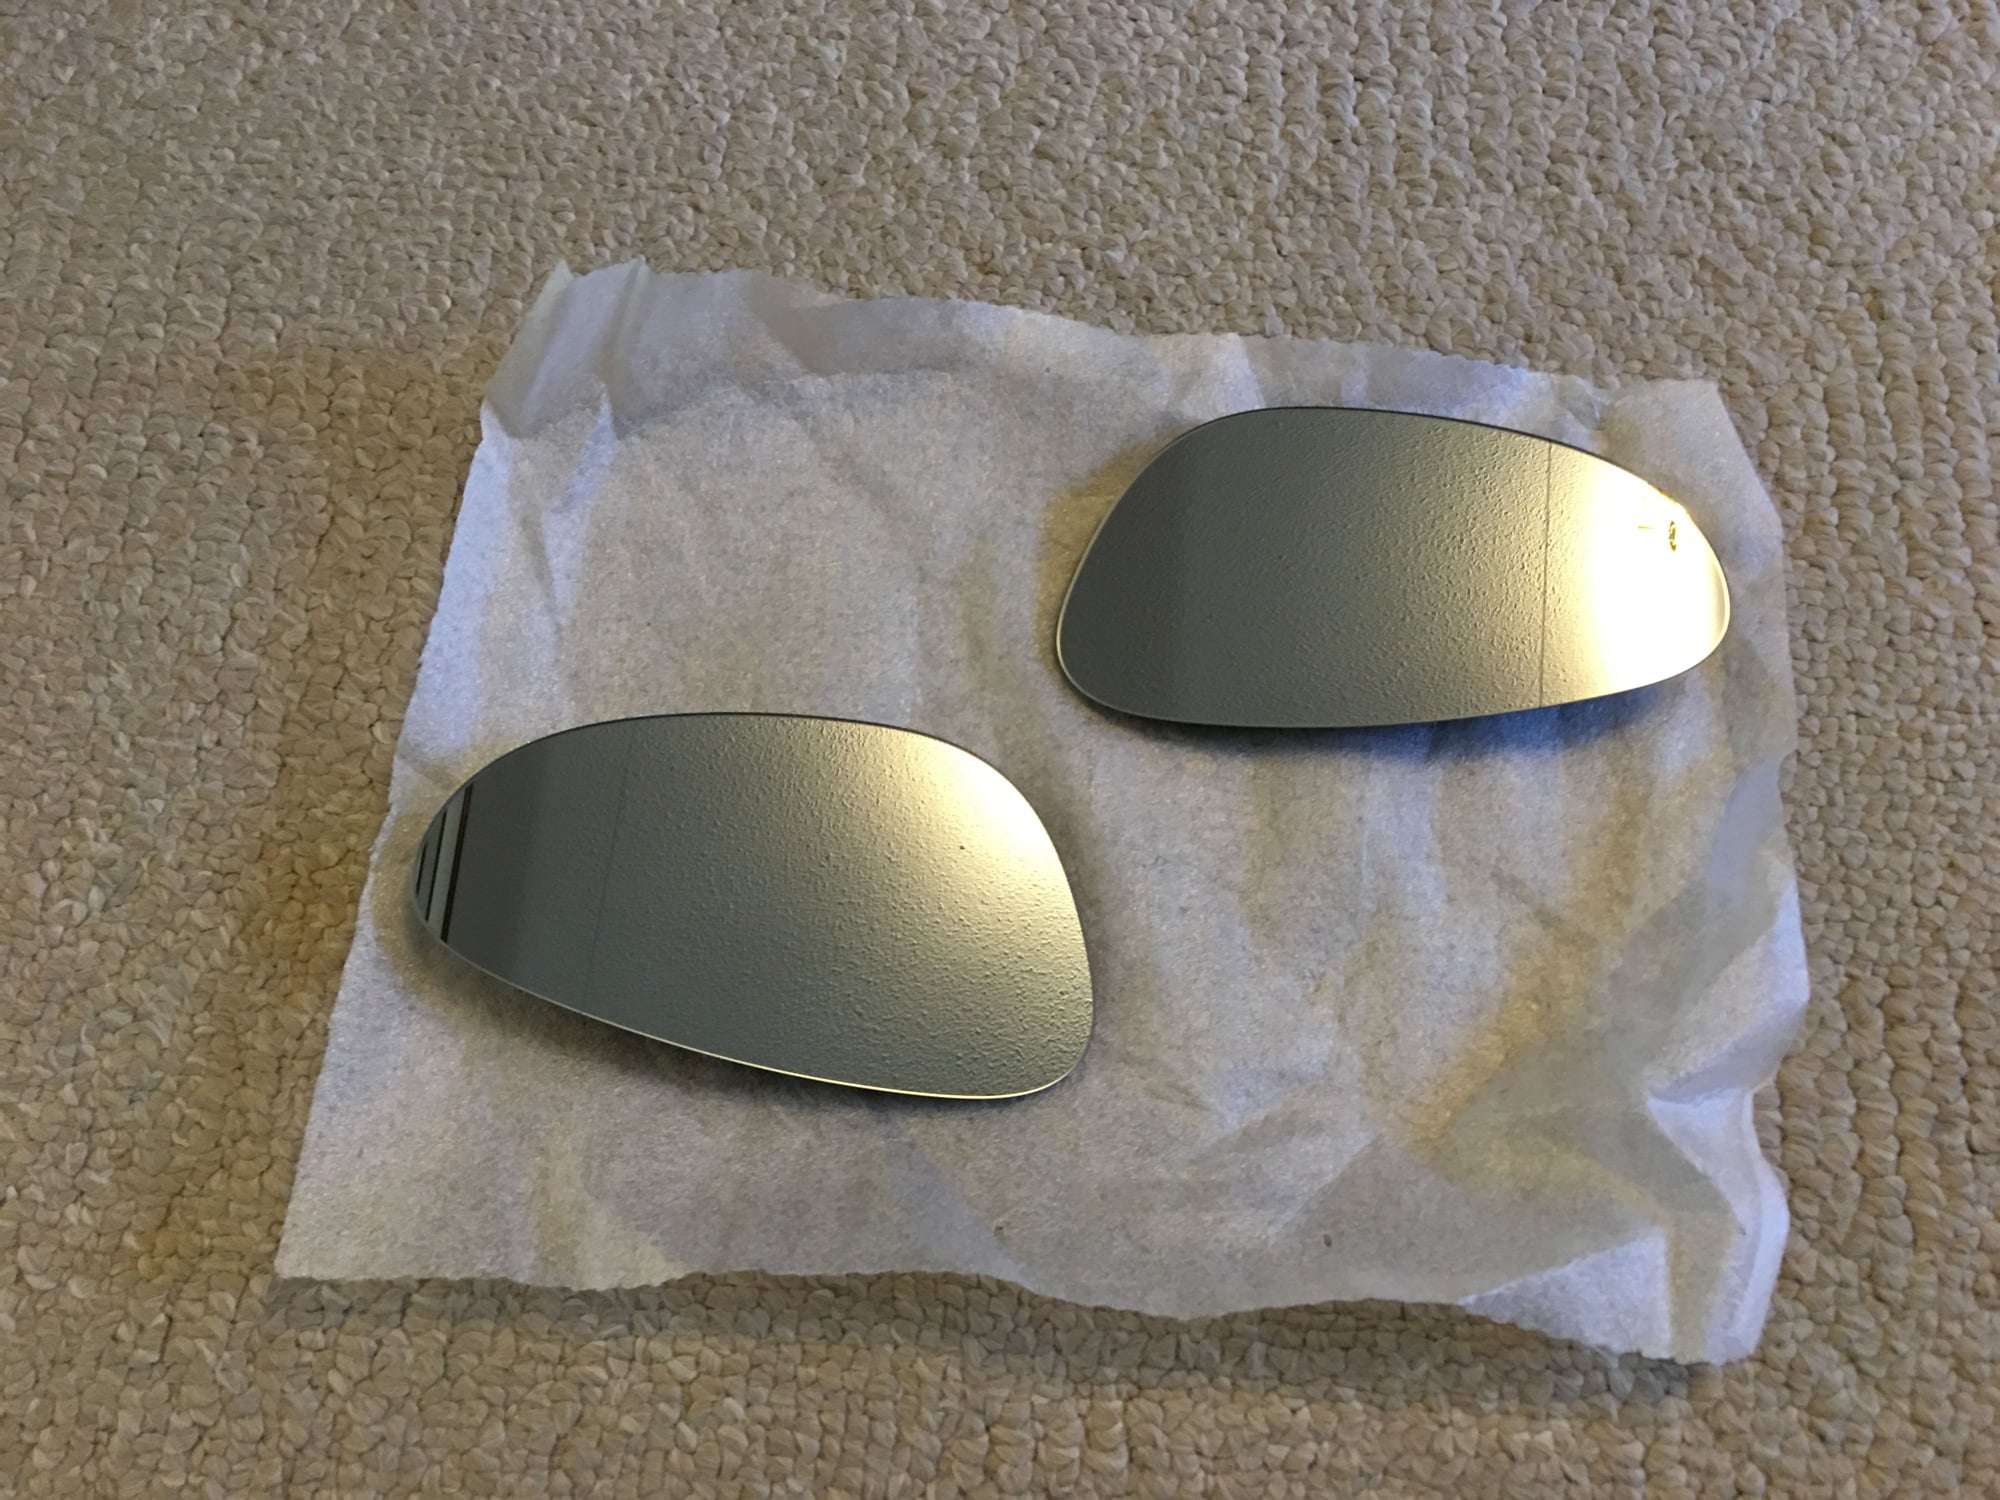 Exterior Body Parts - Porsche OEM Side View Aspheric Mirror Glass - Used - 1999 to 2005 Porsche 911 - 1997 to 2004 Porsche Boxster - Andover, MA 01810, United States